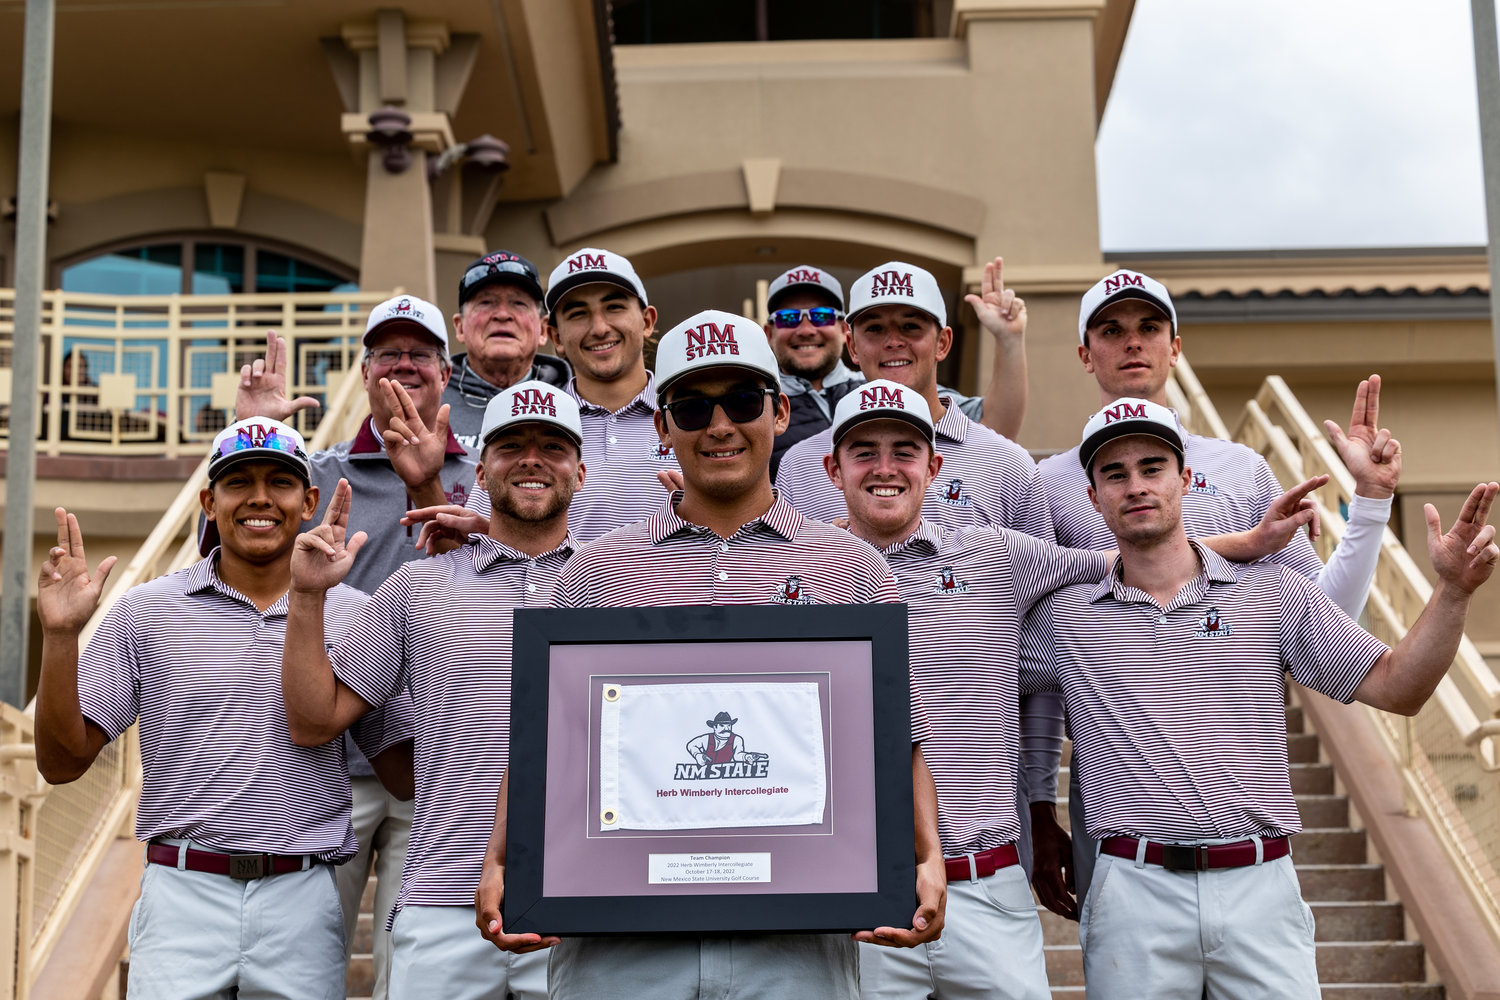 For the third straight year, NM State men's golf claimed the Herb Wimberly Intercollegiate championship played Oct. 17-18 at the NMSU Golf Course in Las Cruces. The Aggies cruised to victory, winning by 20 strokes over second-place finishers Seattle U and Weber State. Shooting a 198 throughout the tournament, Garrison Smith broke the NM State record for the lowest 54-hole score, running away with the individual title, shooting 15-under par. In the final round, Smith carded six birdies without a single bogey to go six-under.